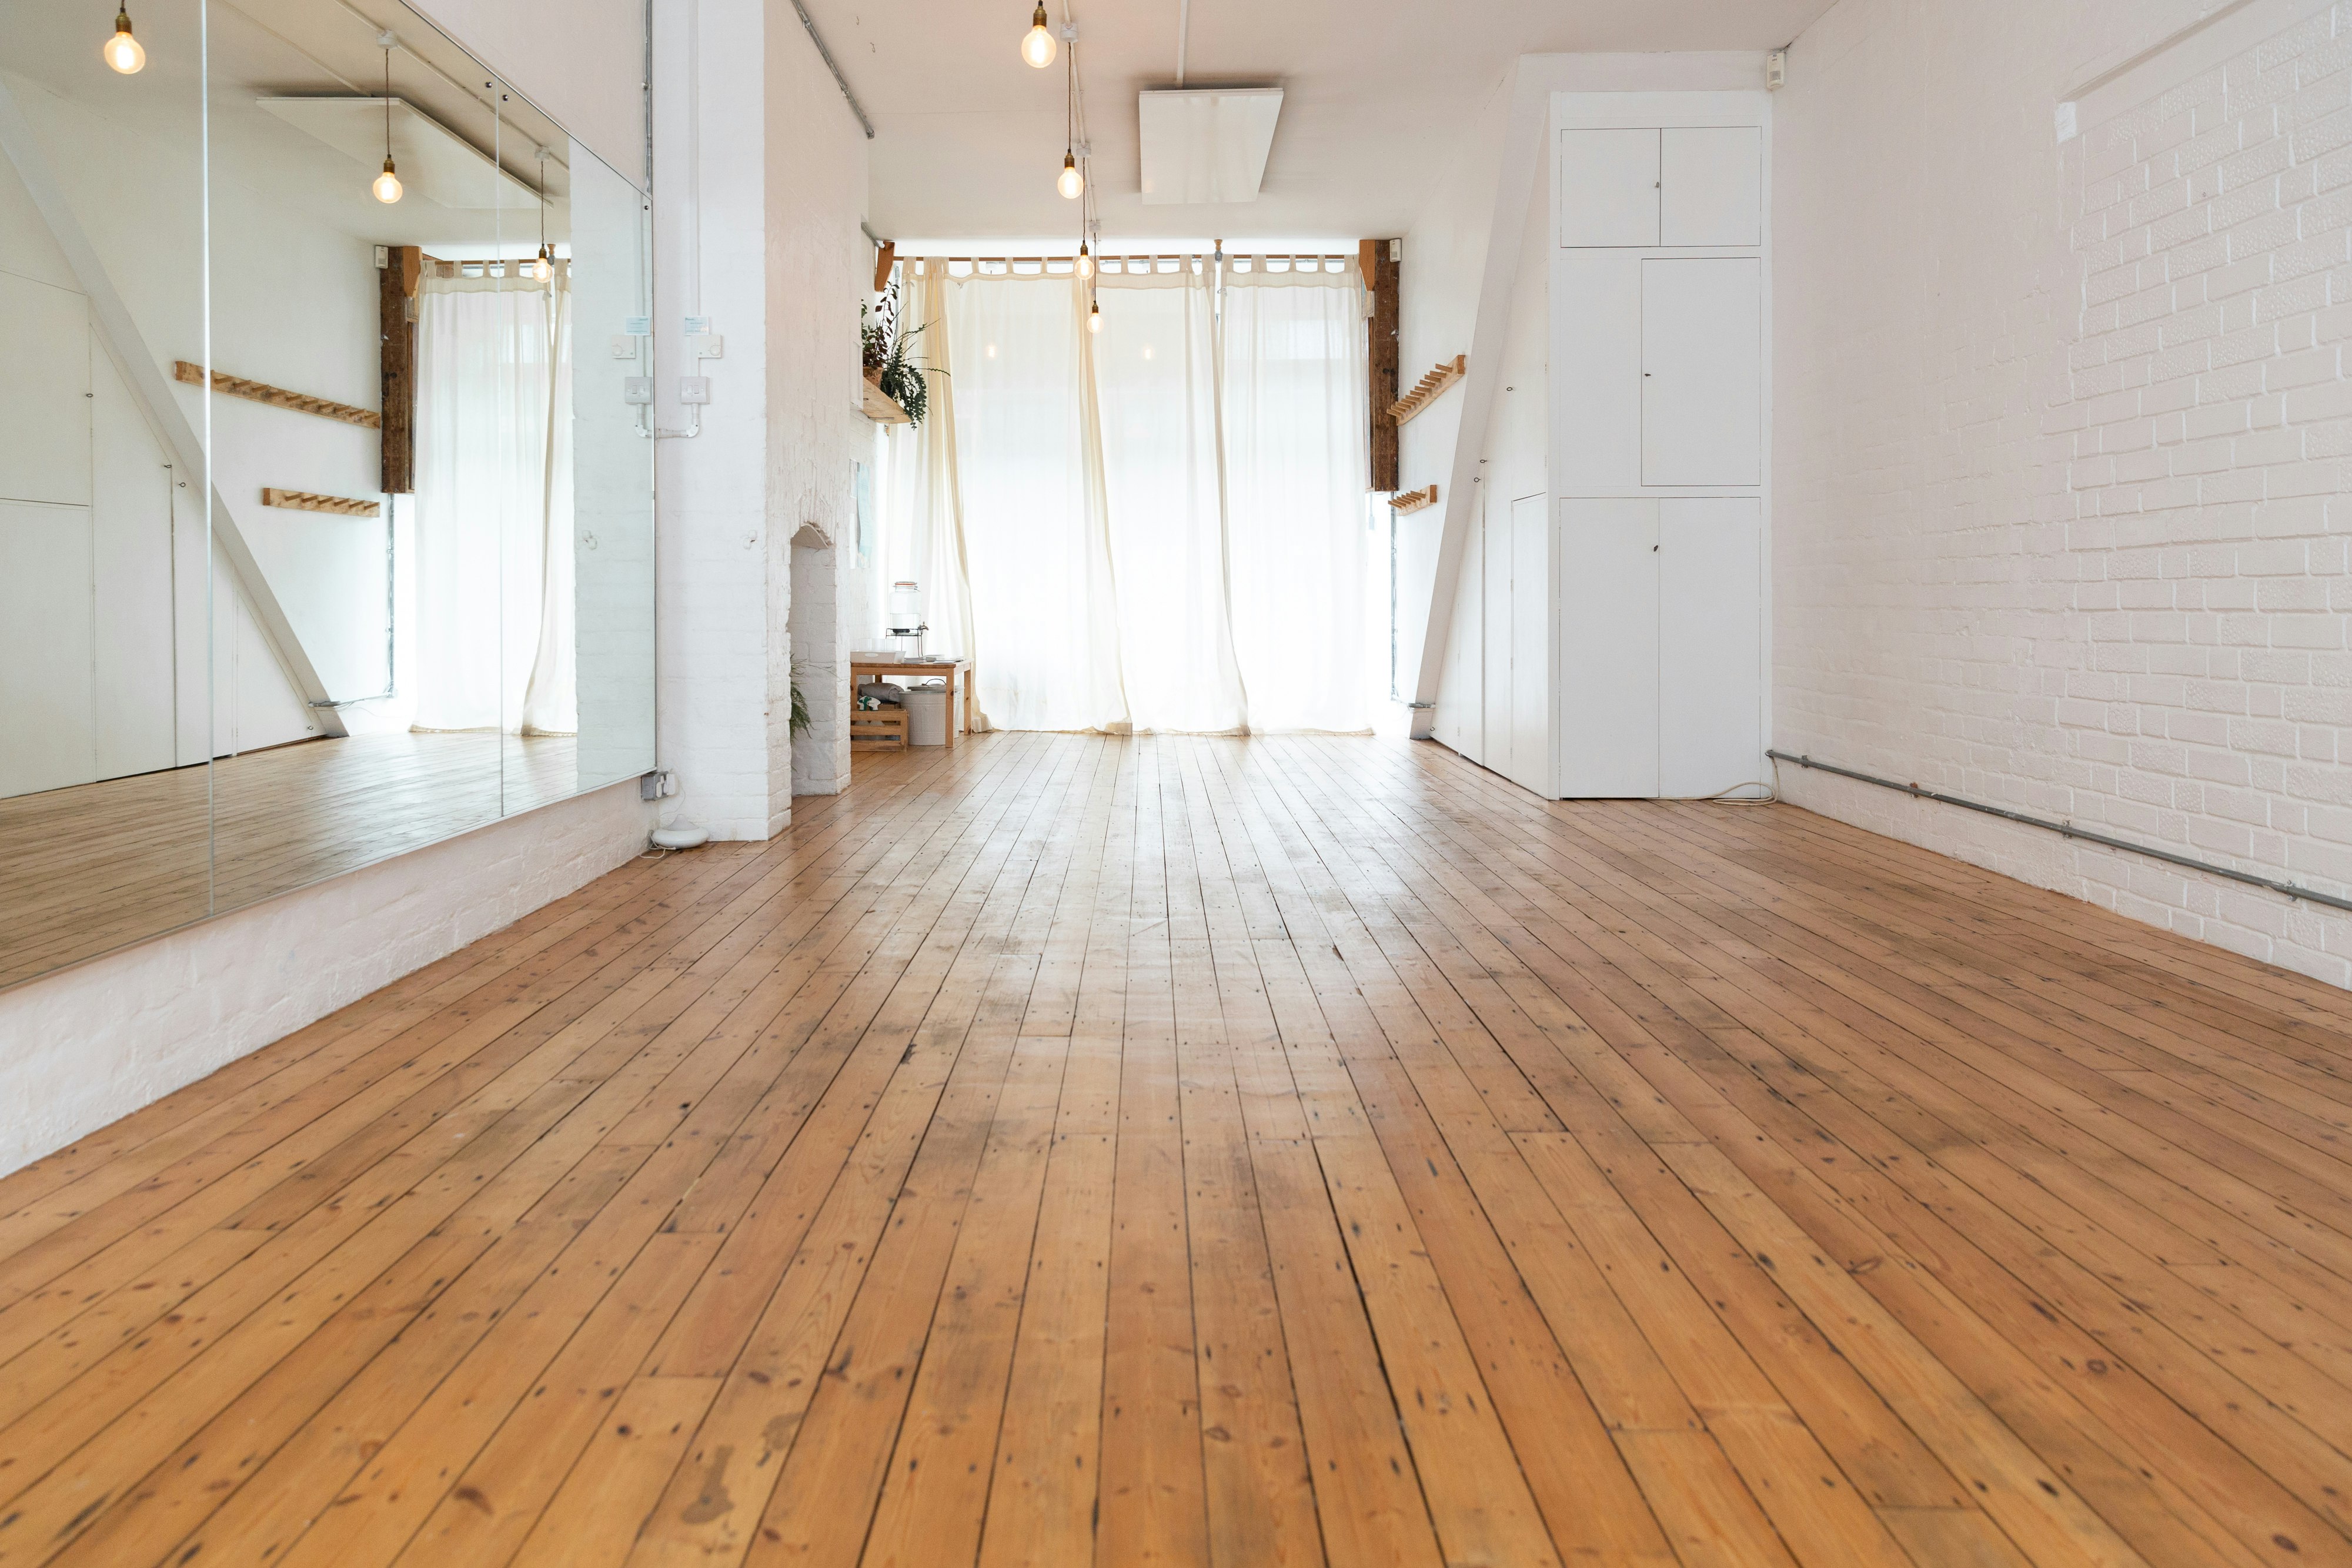 Stretch yoga studio with a hardwood floor, a mirrored wall on the left and a white wall on the right.